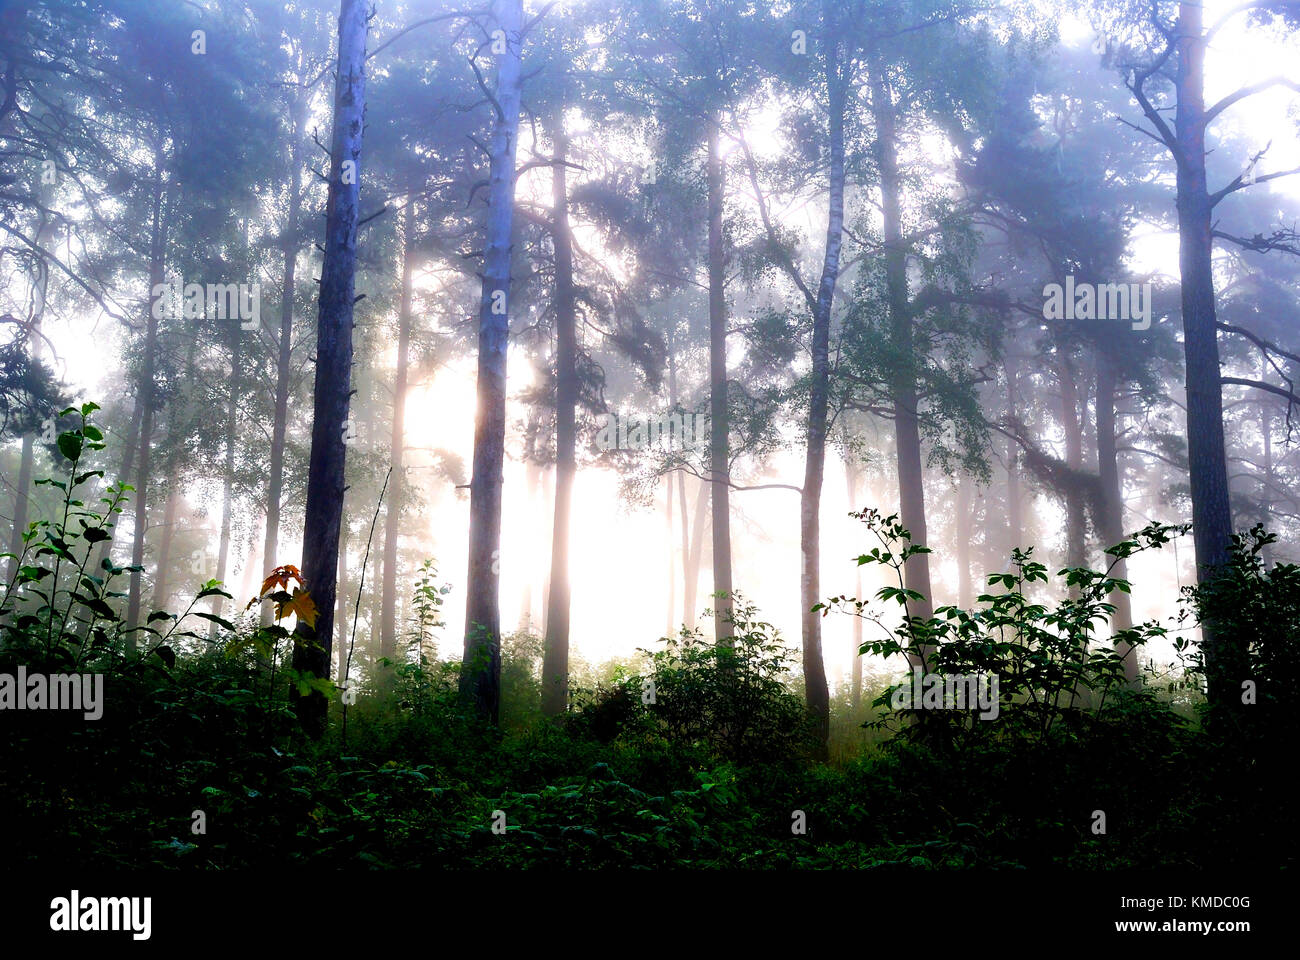 A forest with fog and shining behind trees Stock Photo